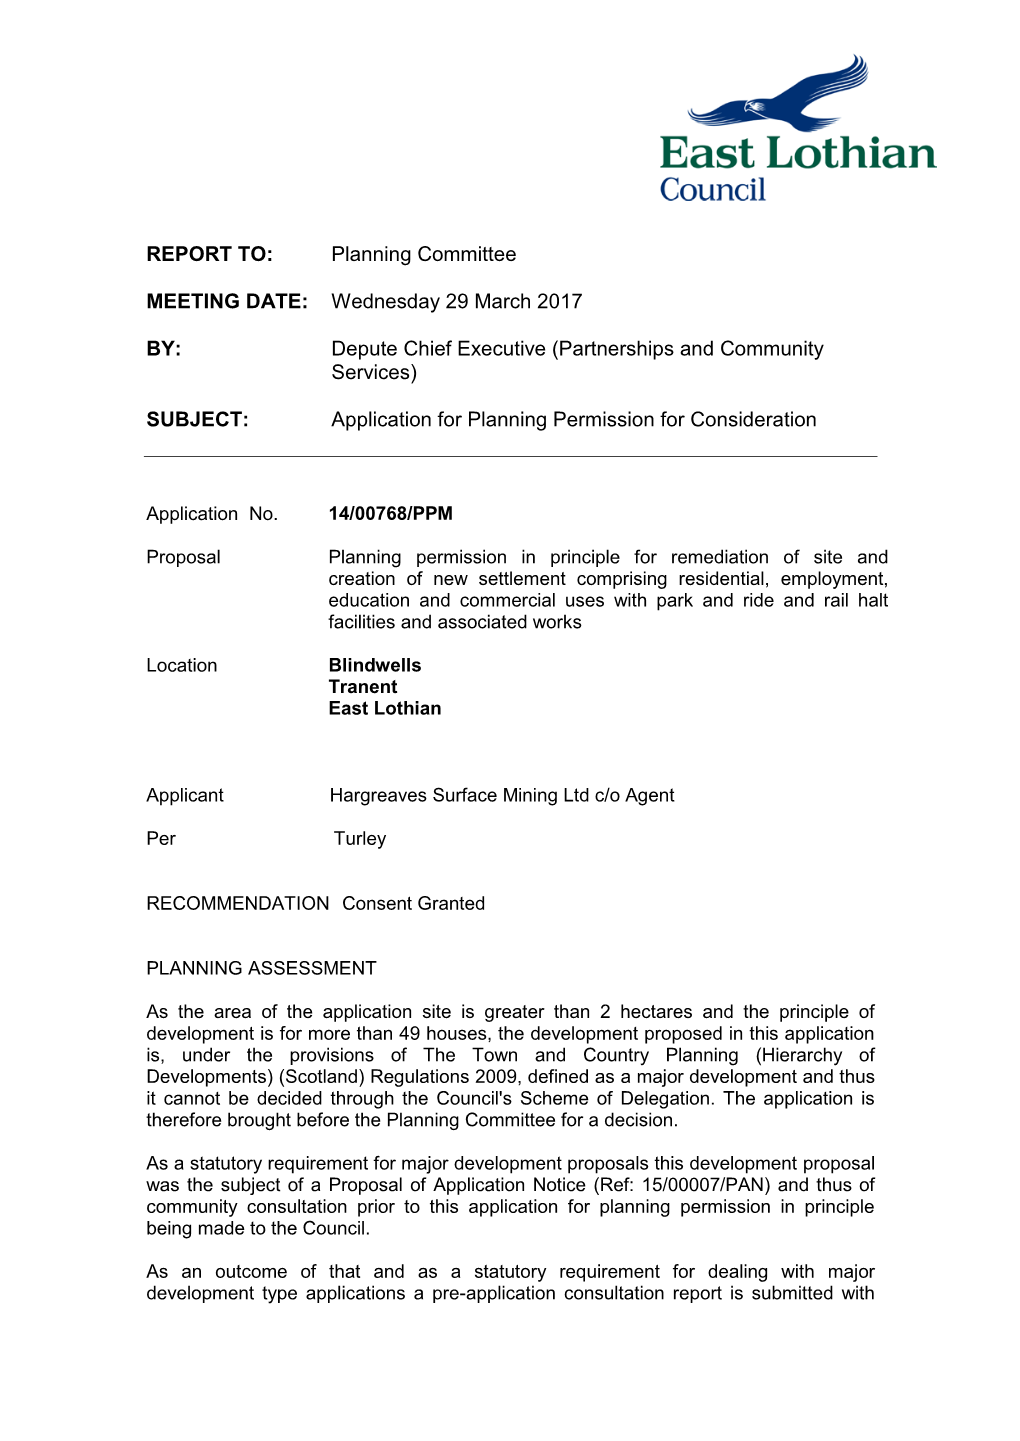 Planning Permission in Principle for Remediation of Site